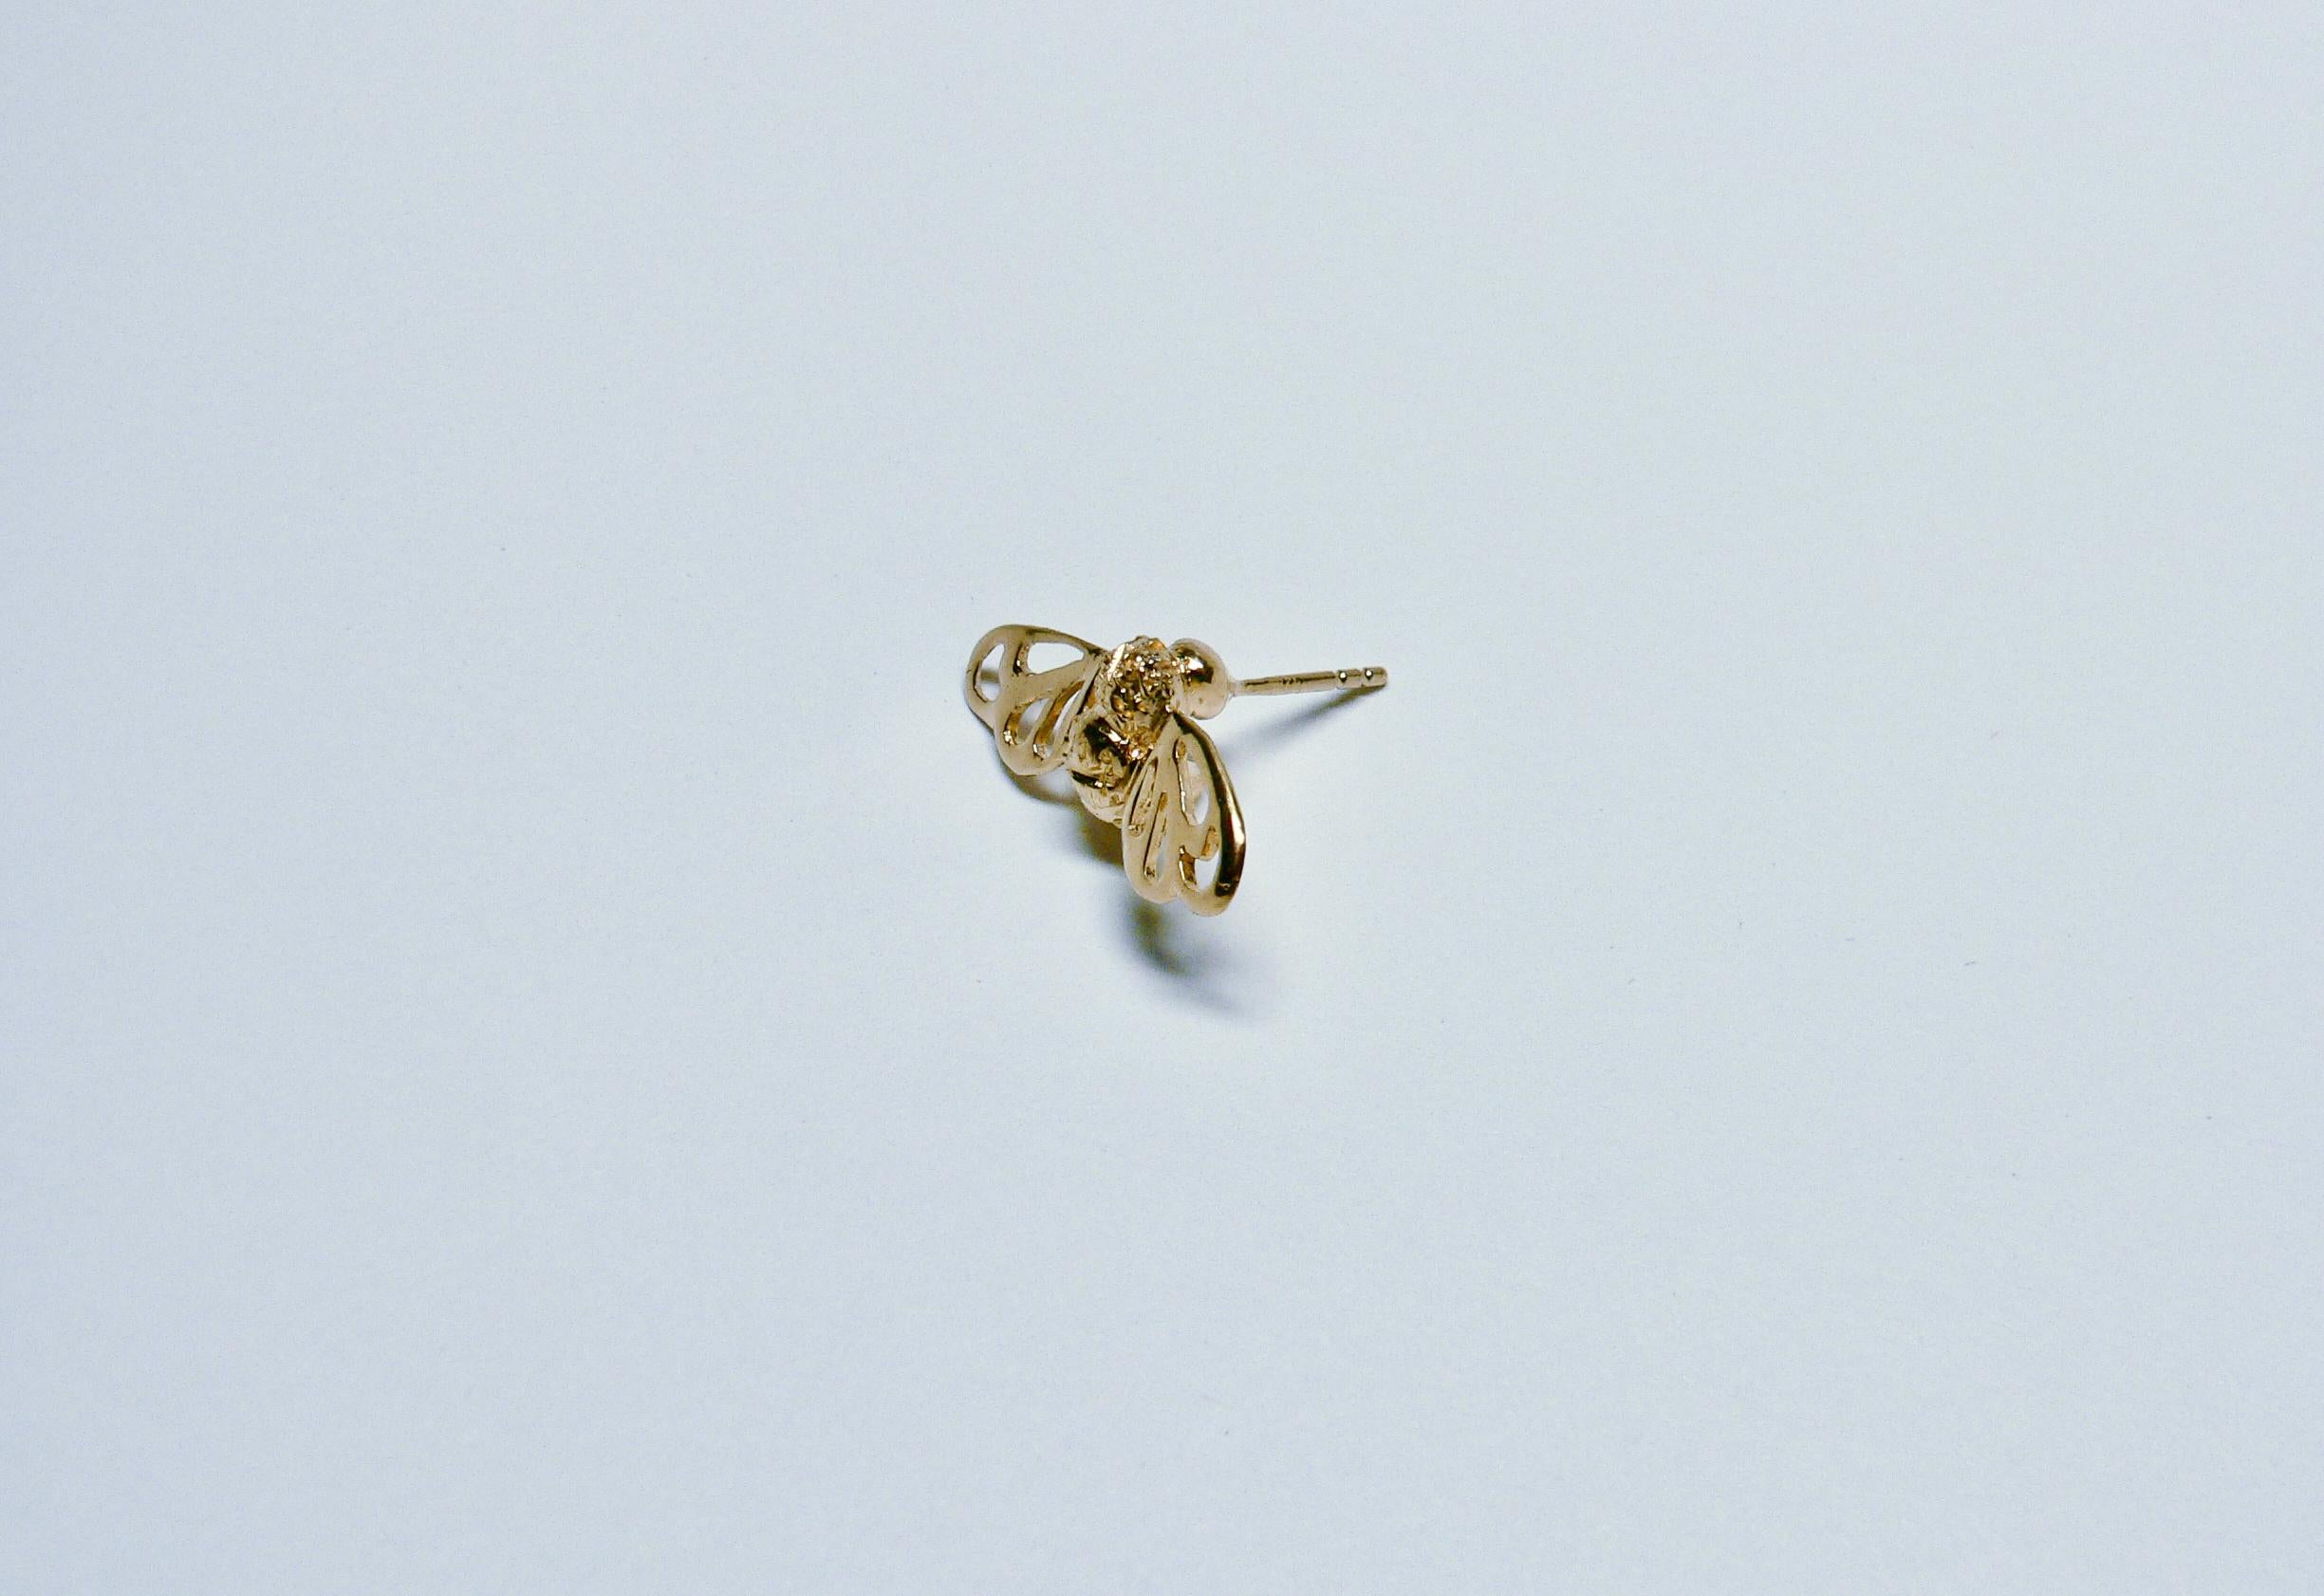 Bee earring from Bee Collection is made of Sterling Silver with 18 Karat gold plated. It is a motif of honey bee resting on the flower or on the leaf.

The size is about 11mm length, 22mm width, 17mm depth (included post length) and 3grams of this